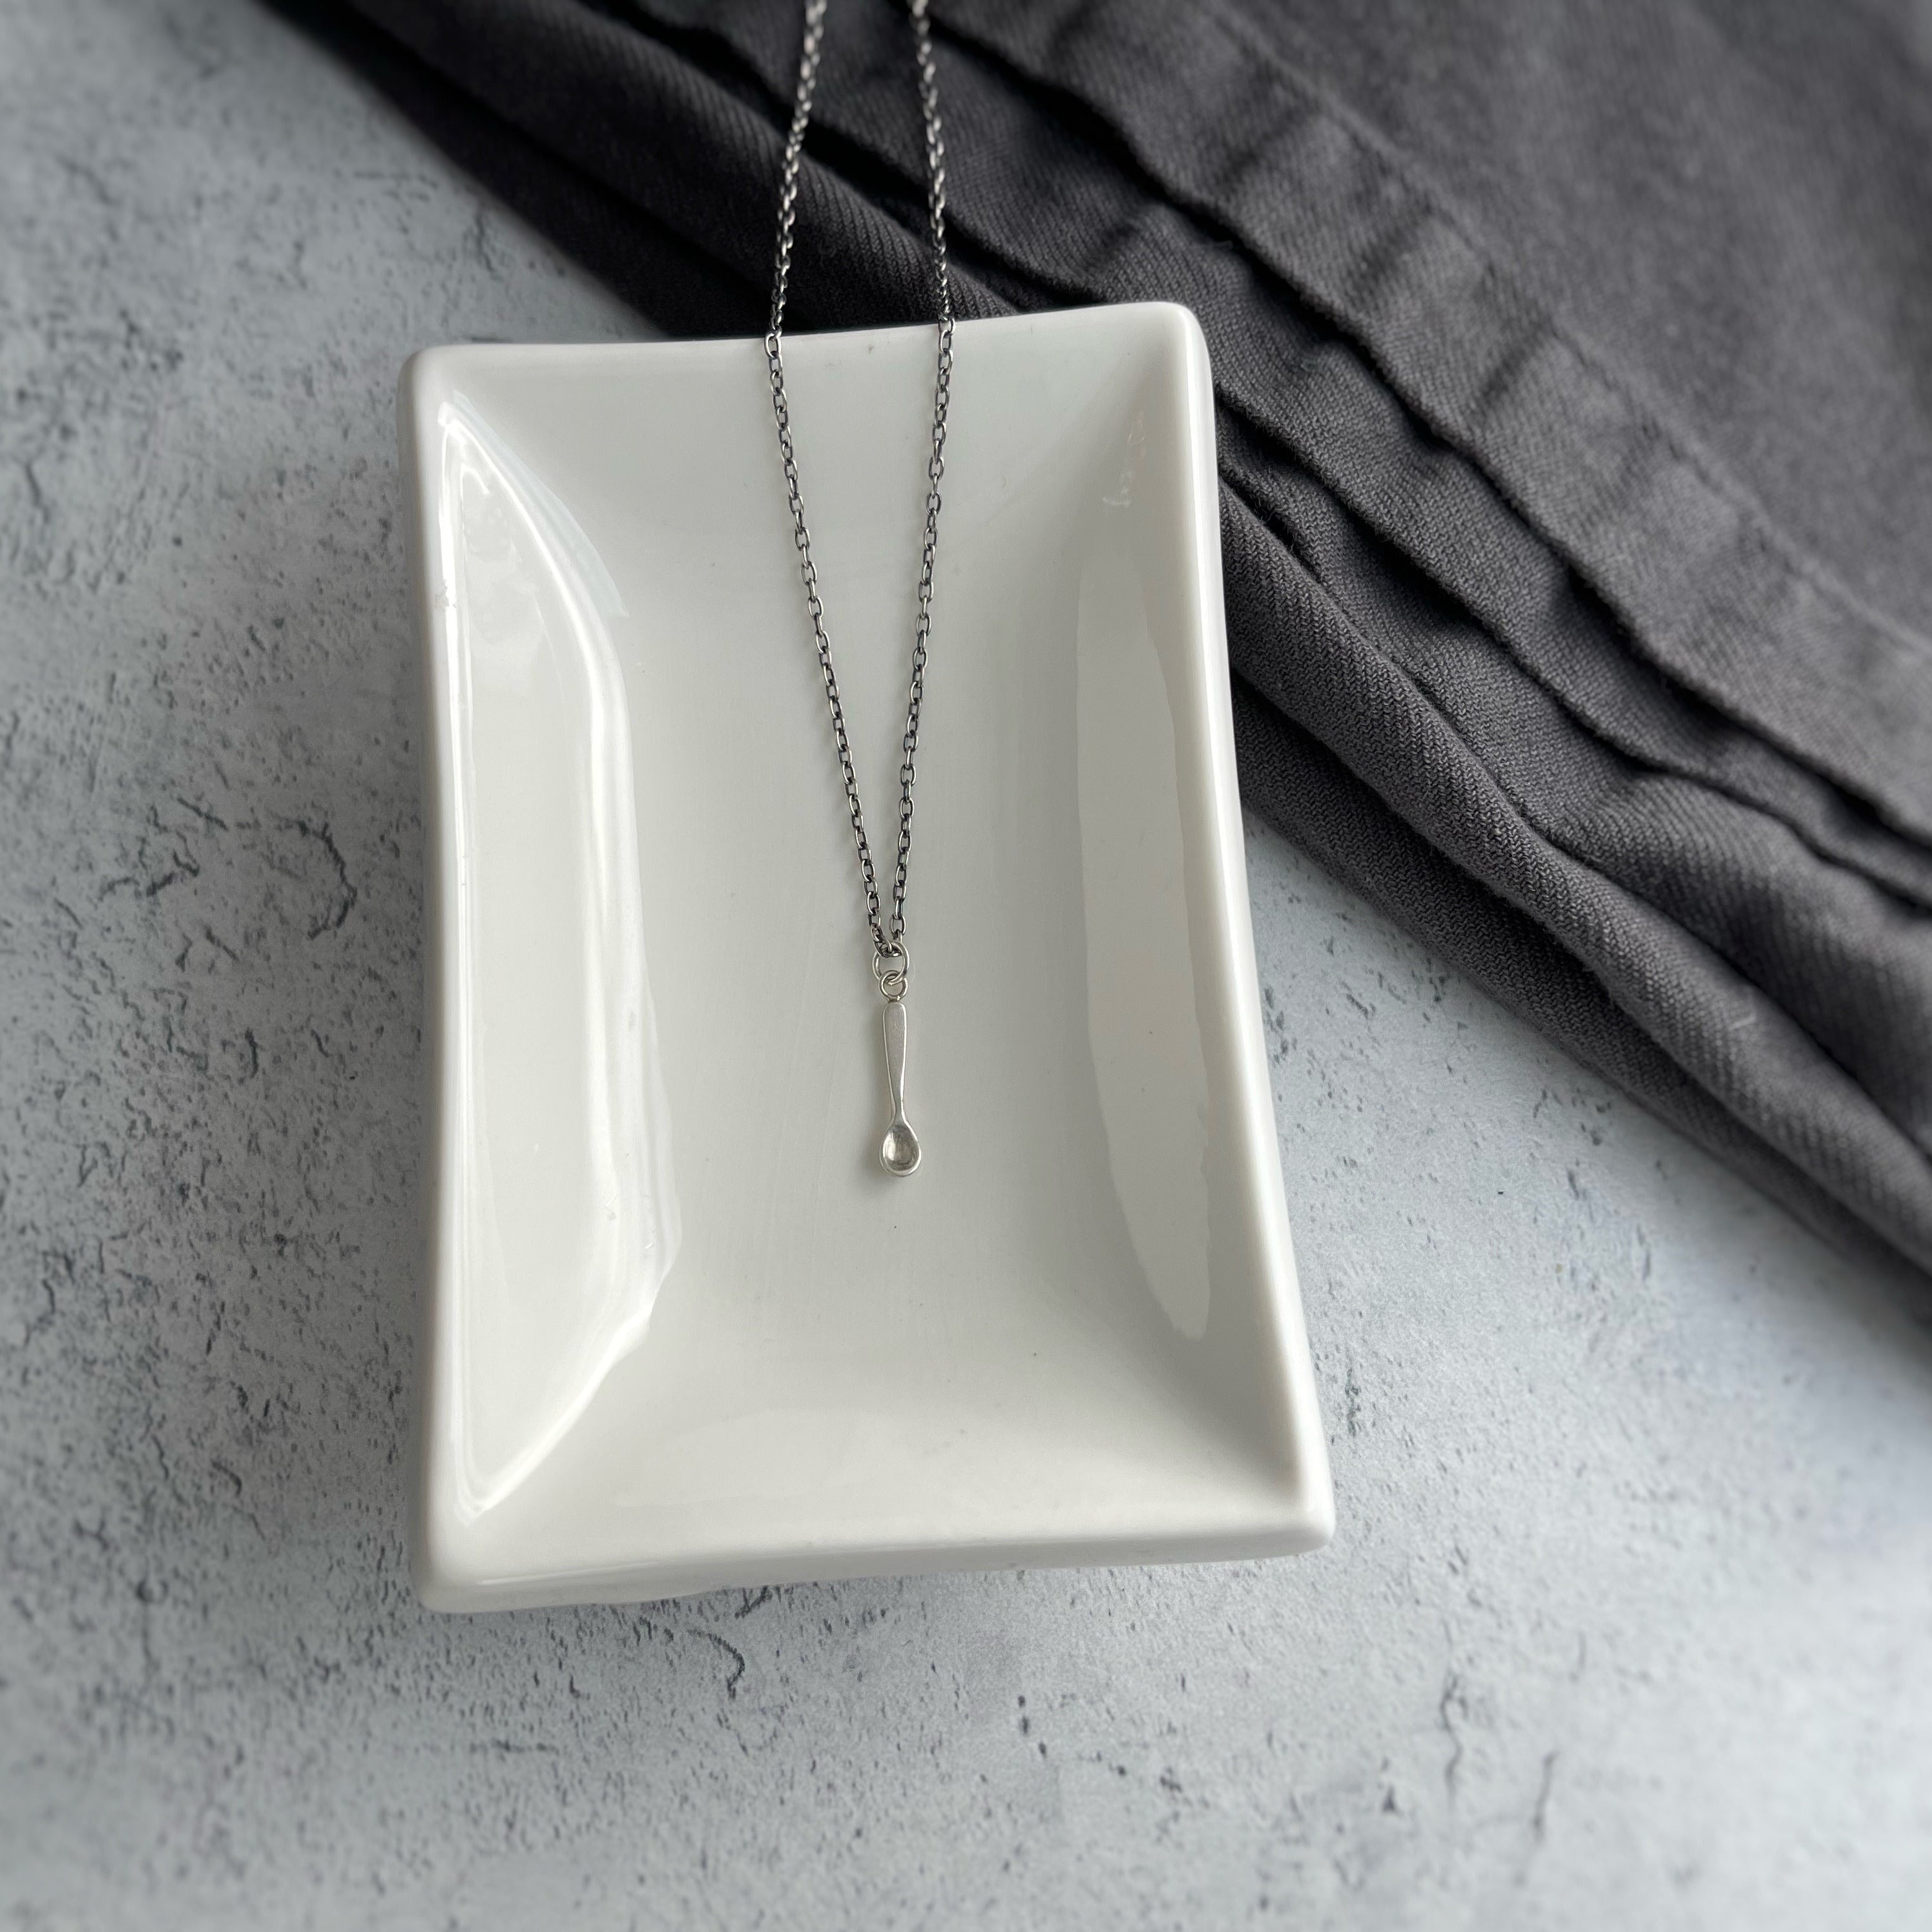 Little Spoon Necklace Meaning | Small Spoon Necklace Meaning | Necklace  Spoon Inside - Necklace - Aliexpress